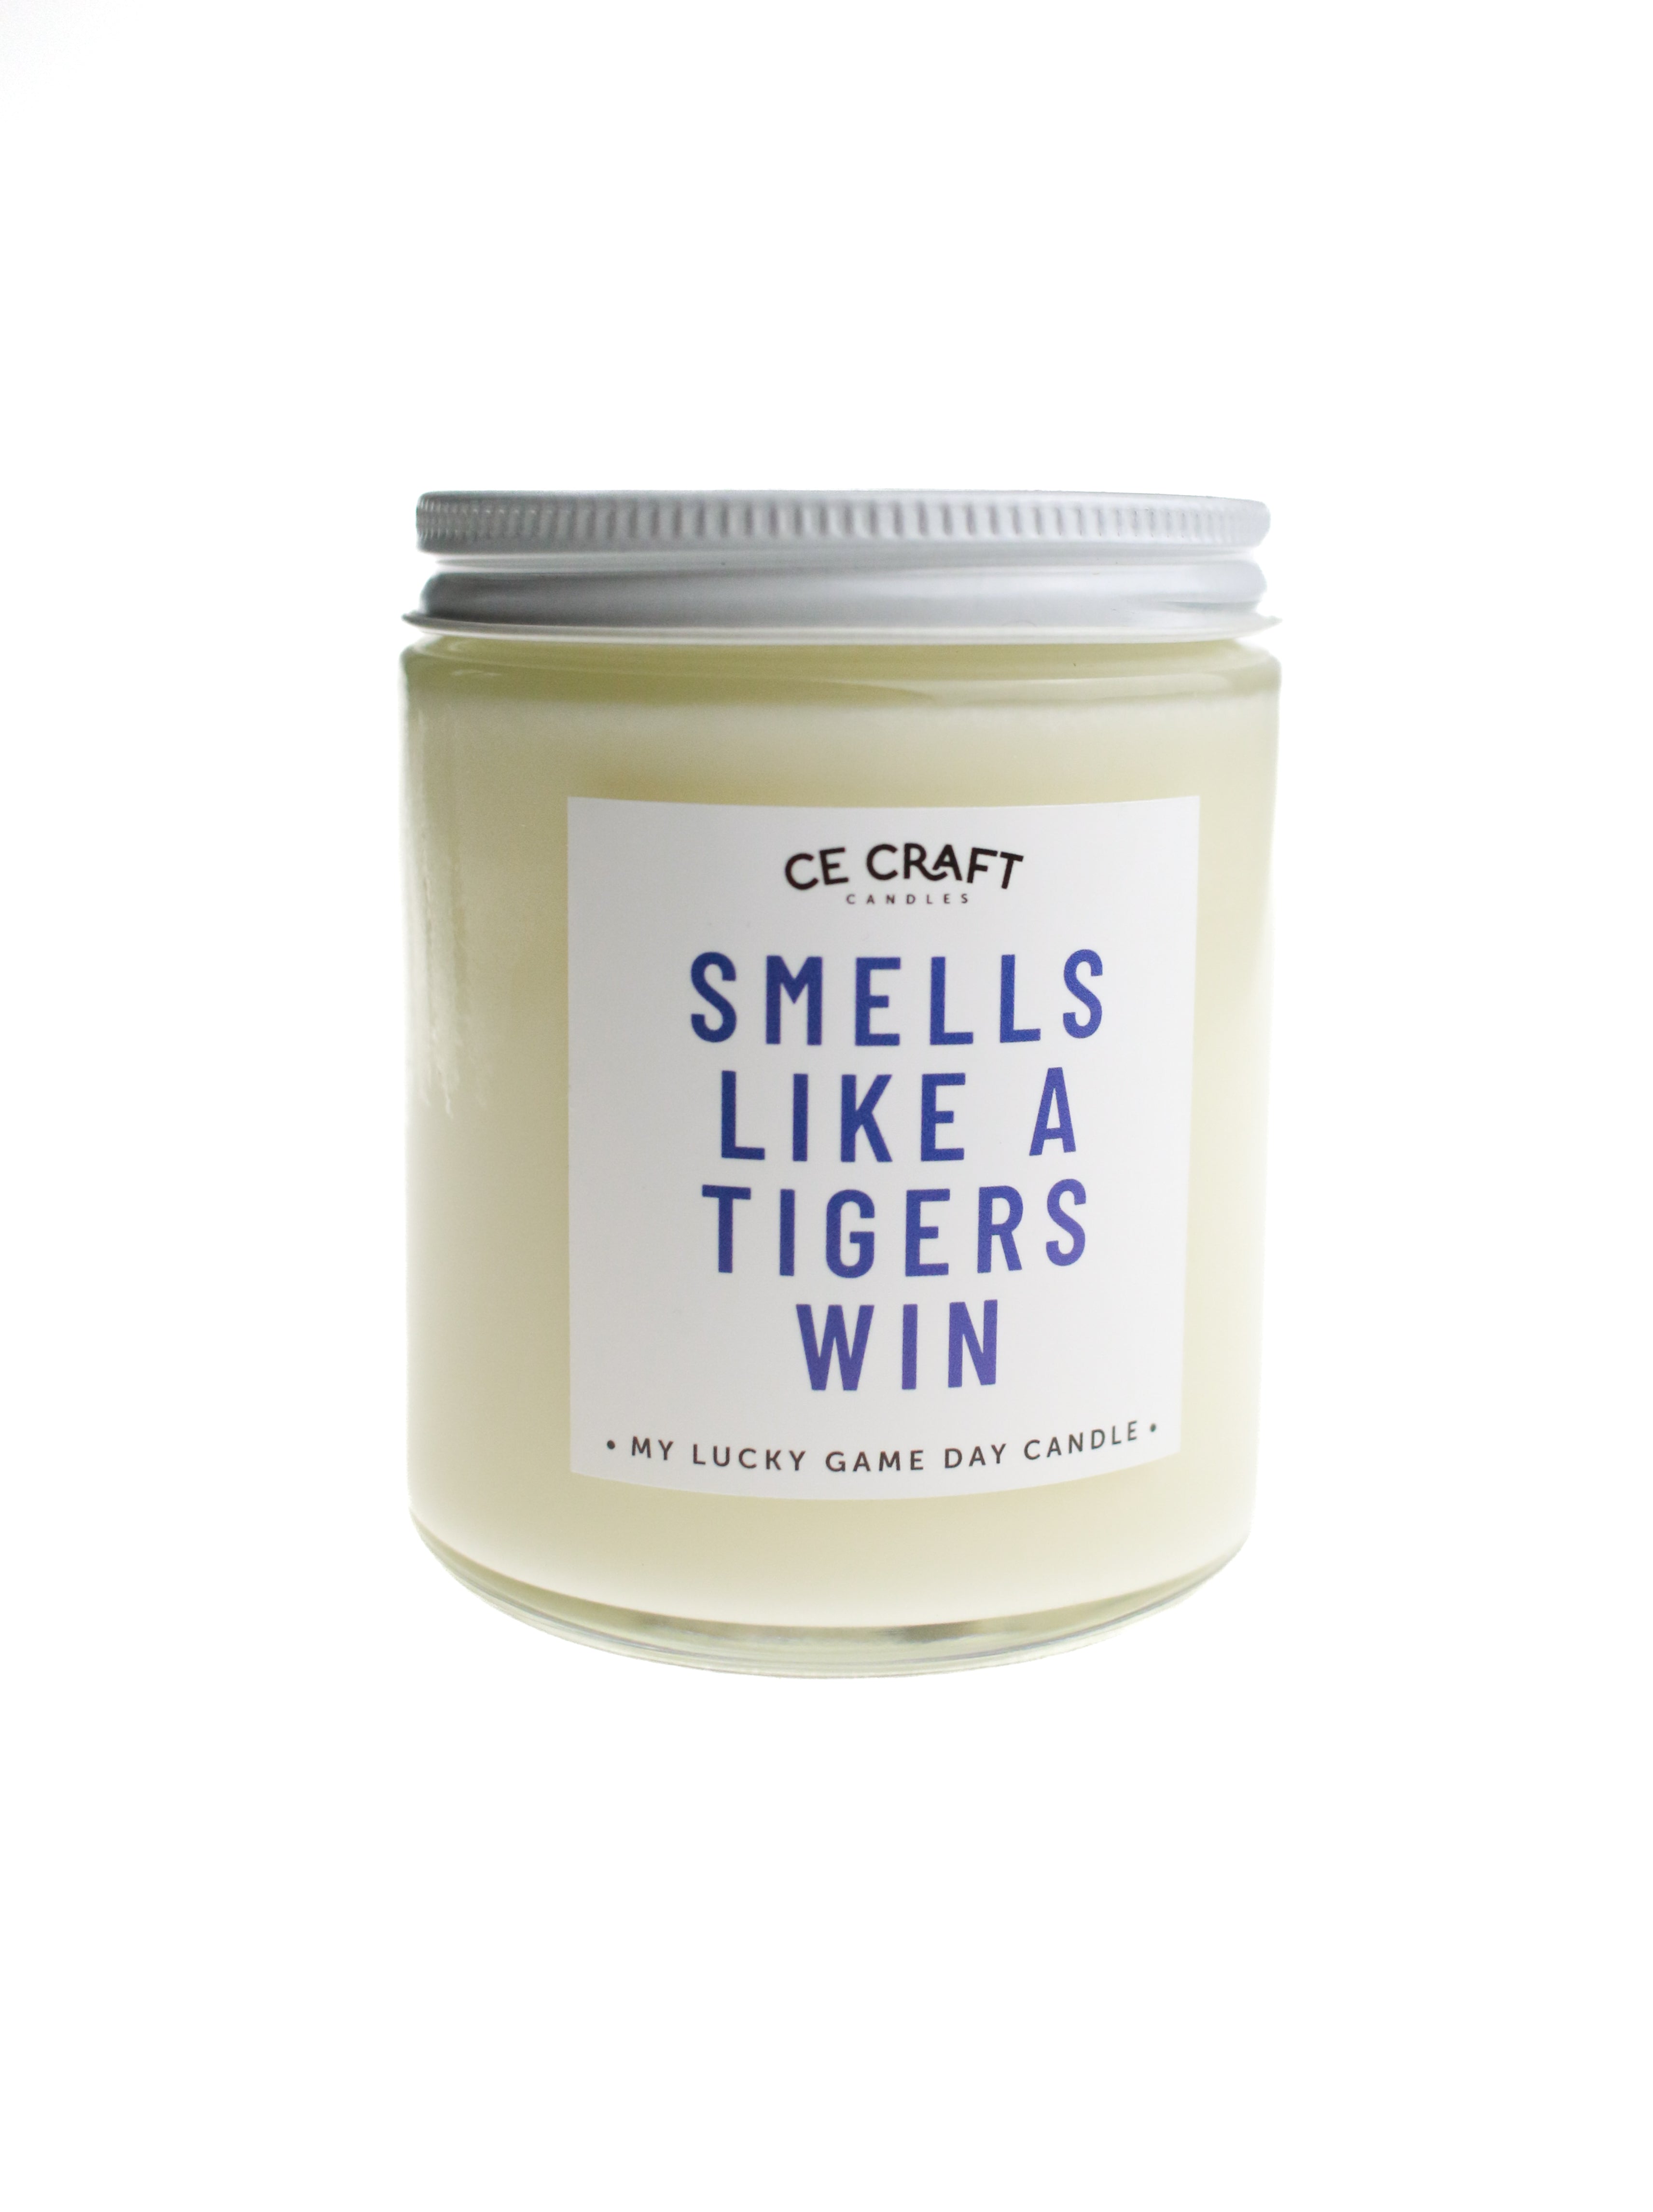 Smells Like a Tigers Win Candle